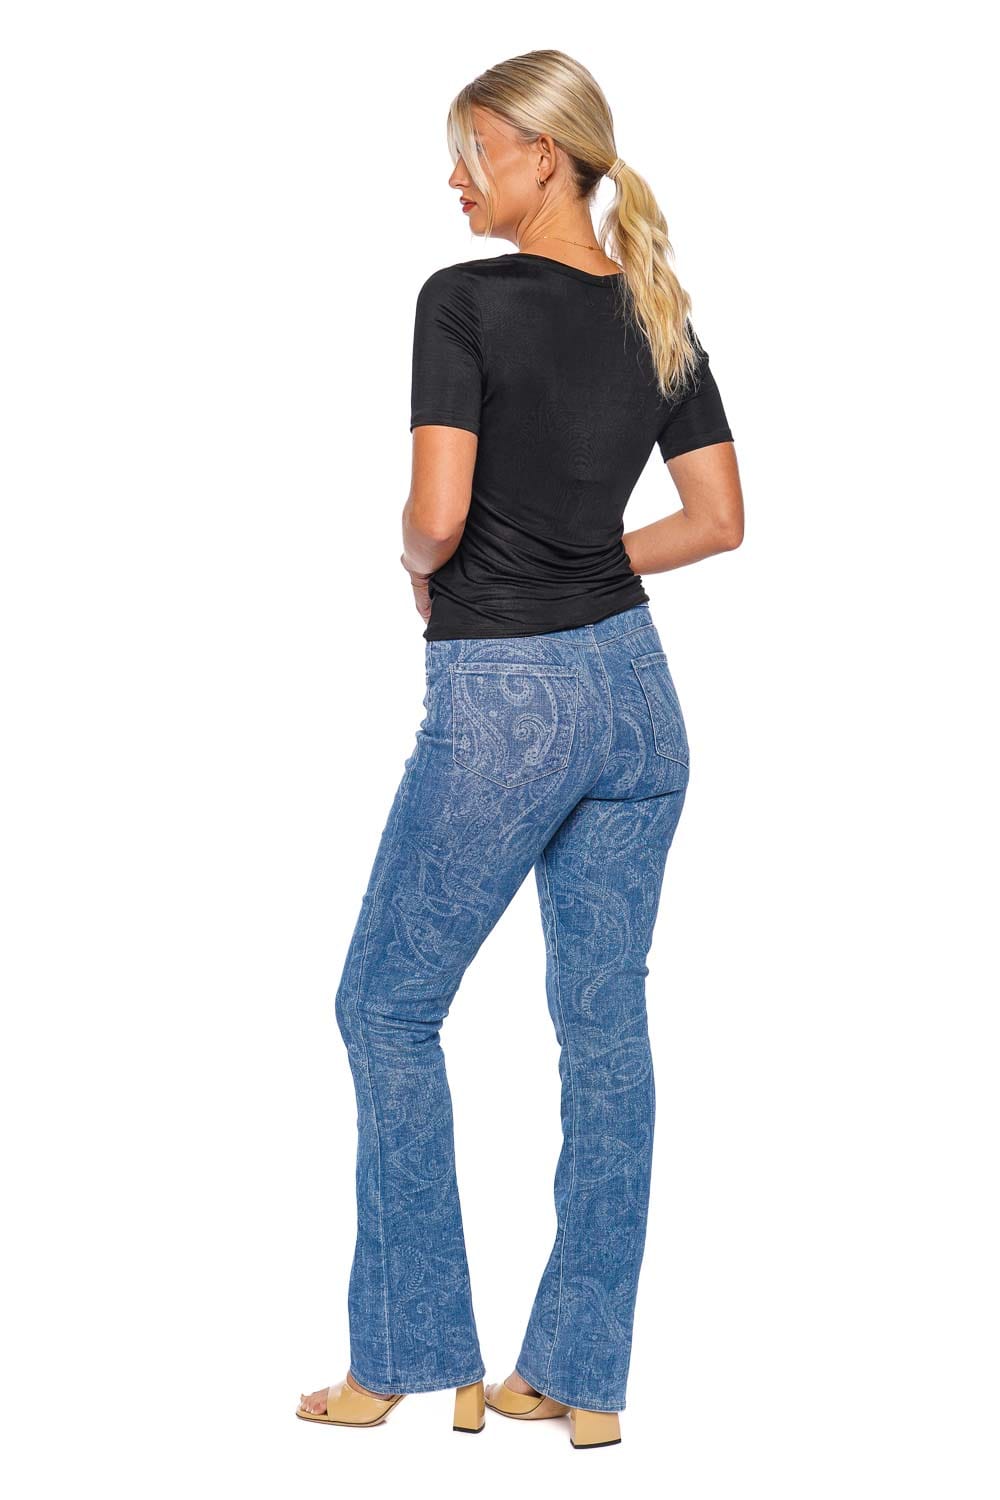 L'AGENCE Stassi Paisley Stretch Boot Jeans